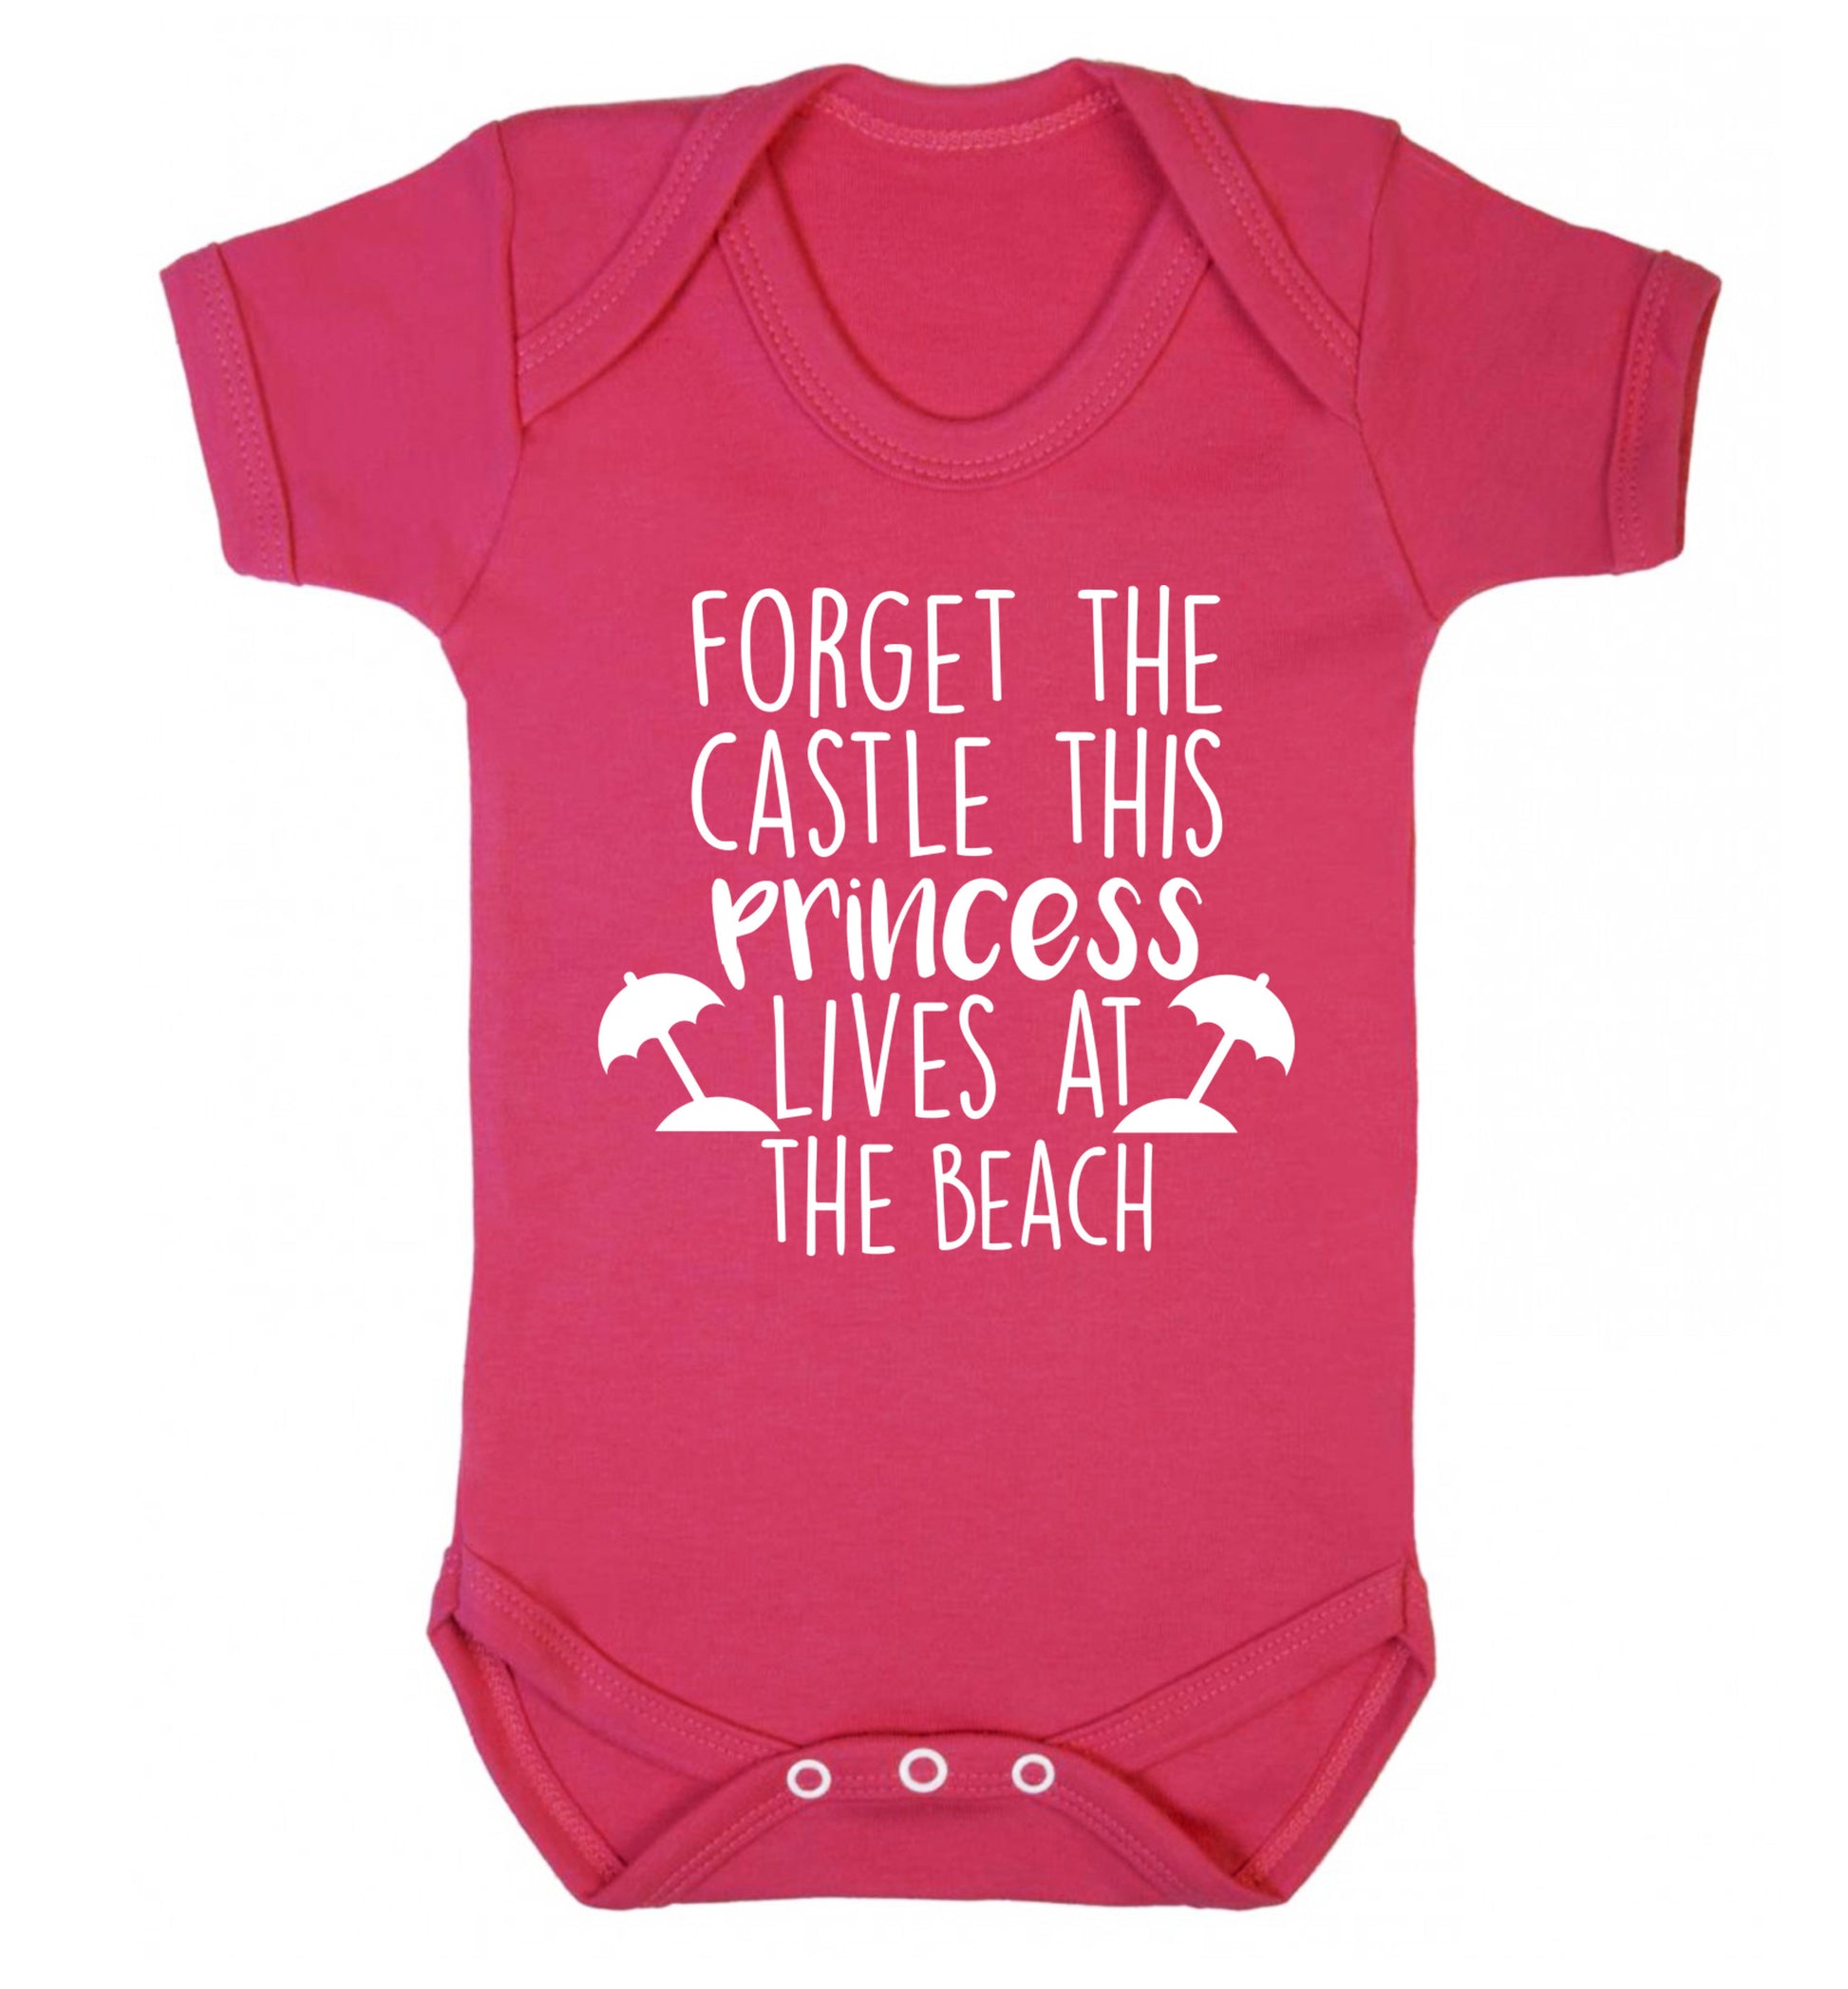 Forget the castle this princess lives at the beach Baby Vest dark pink 18-24 months